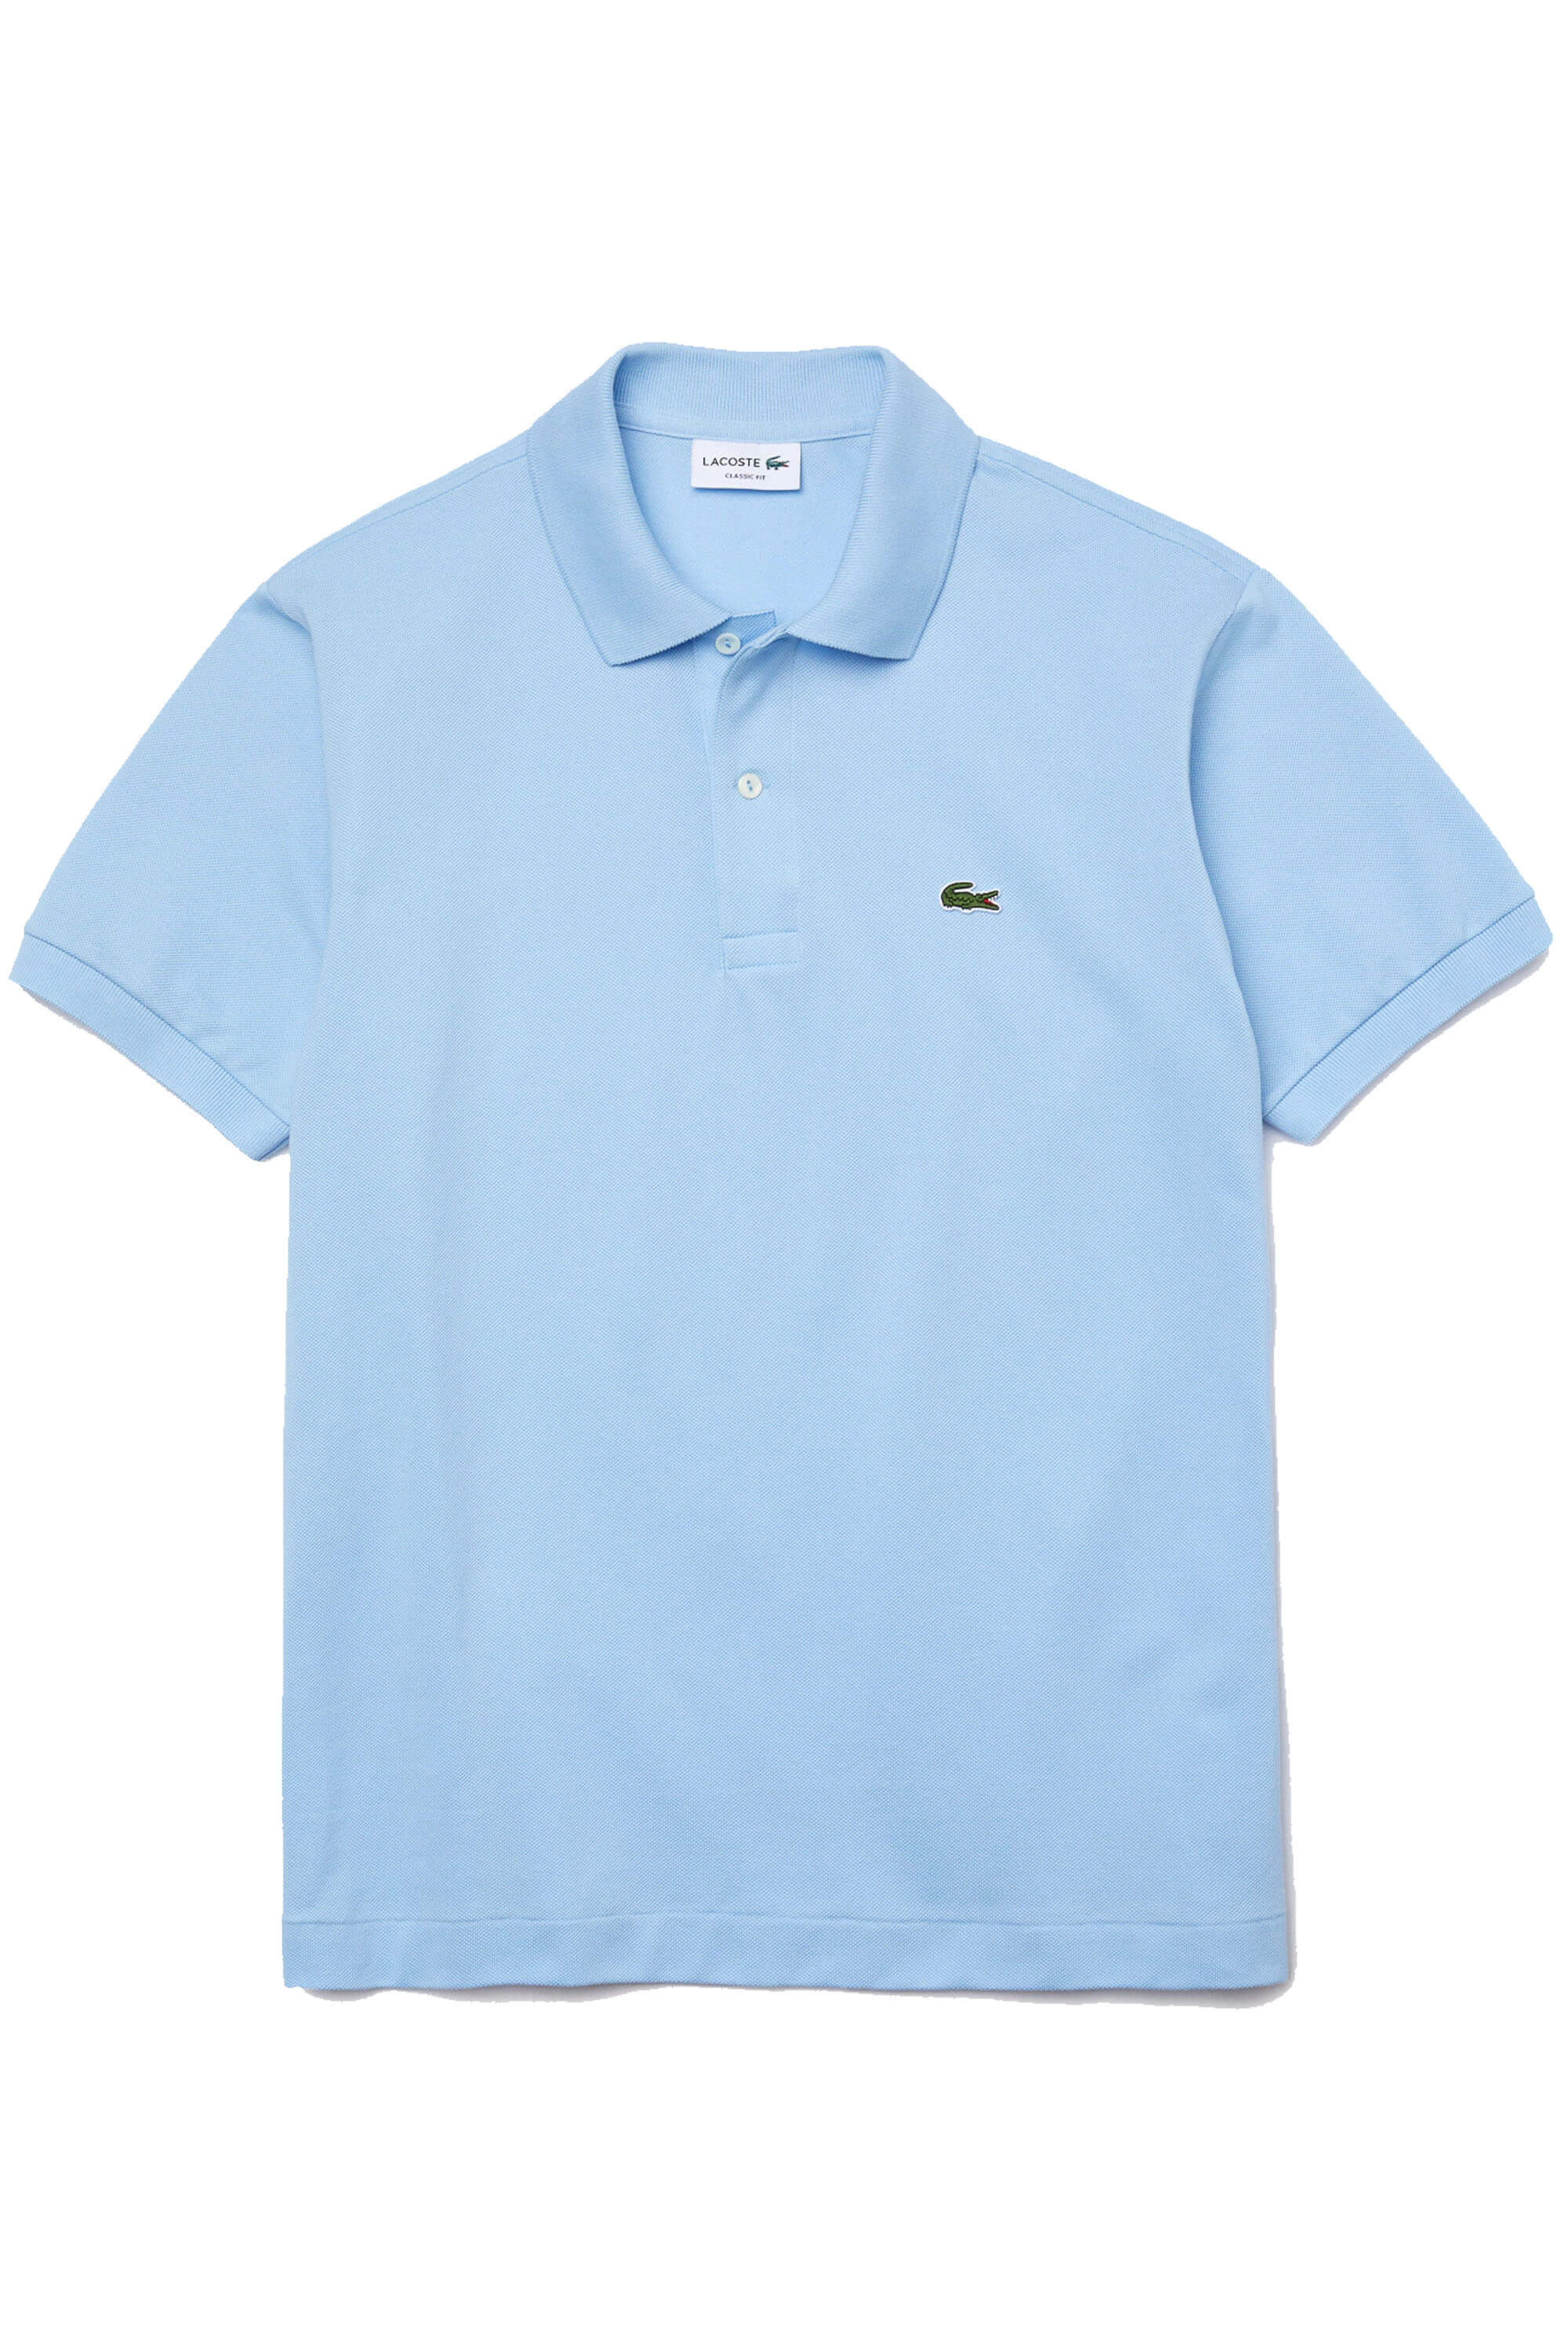 Lacoste Classic Fit Blue Polo